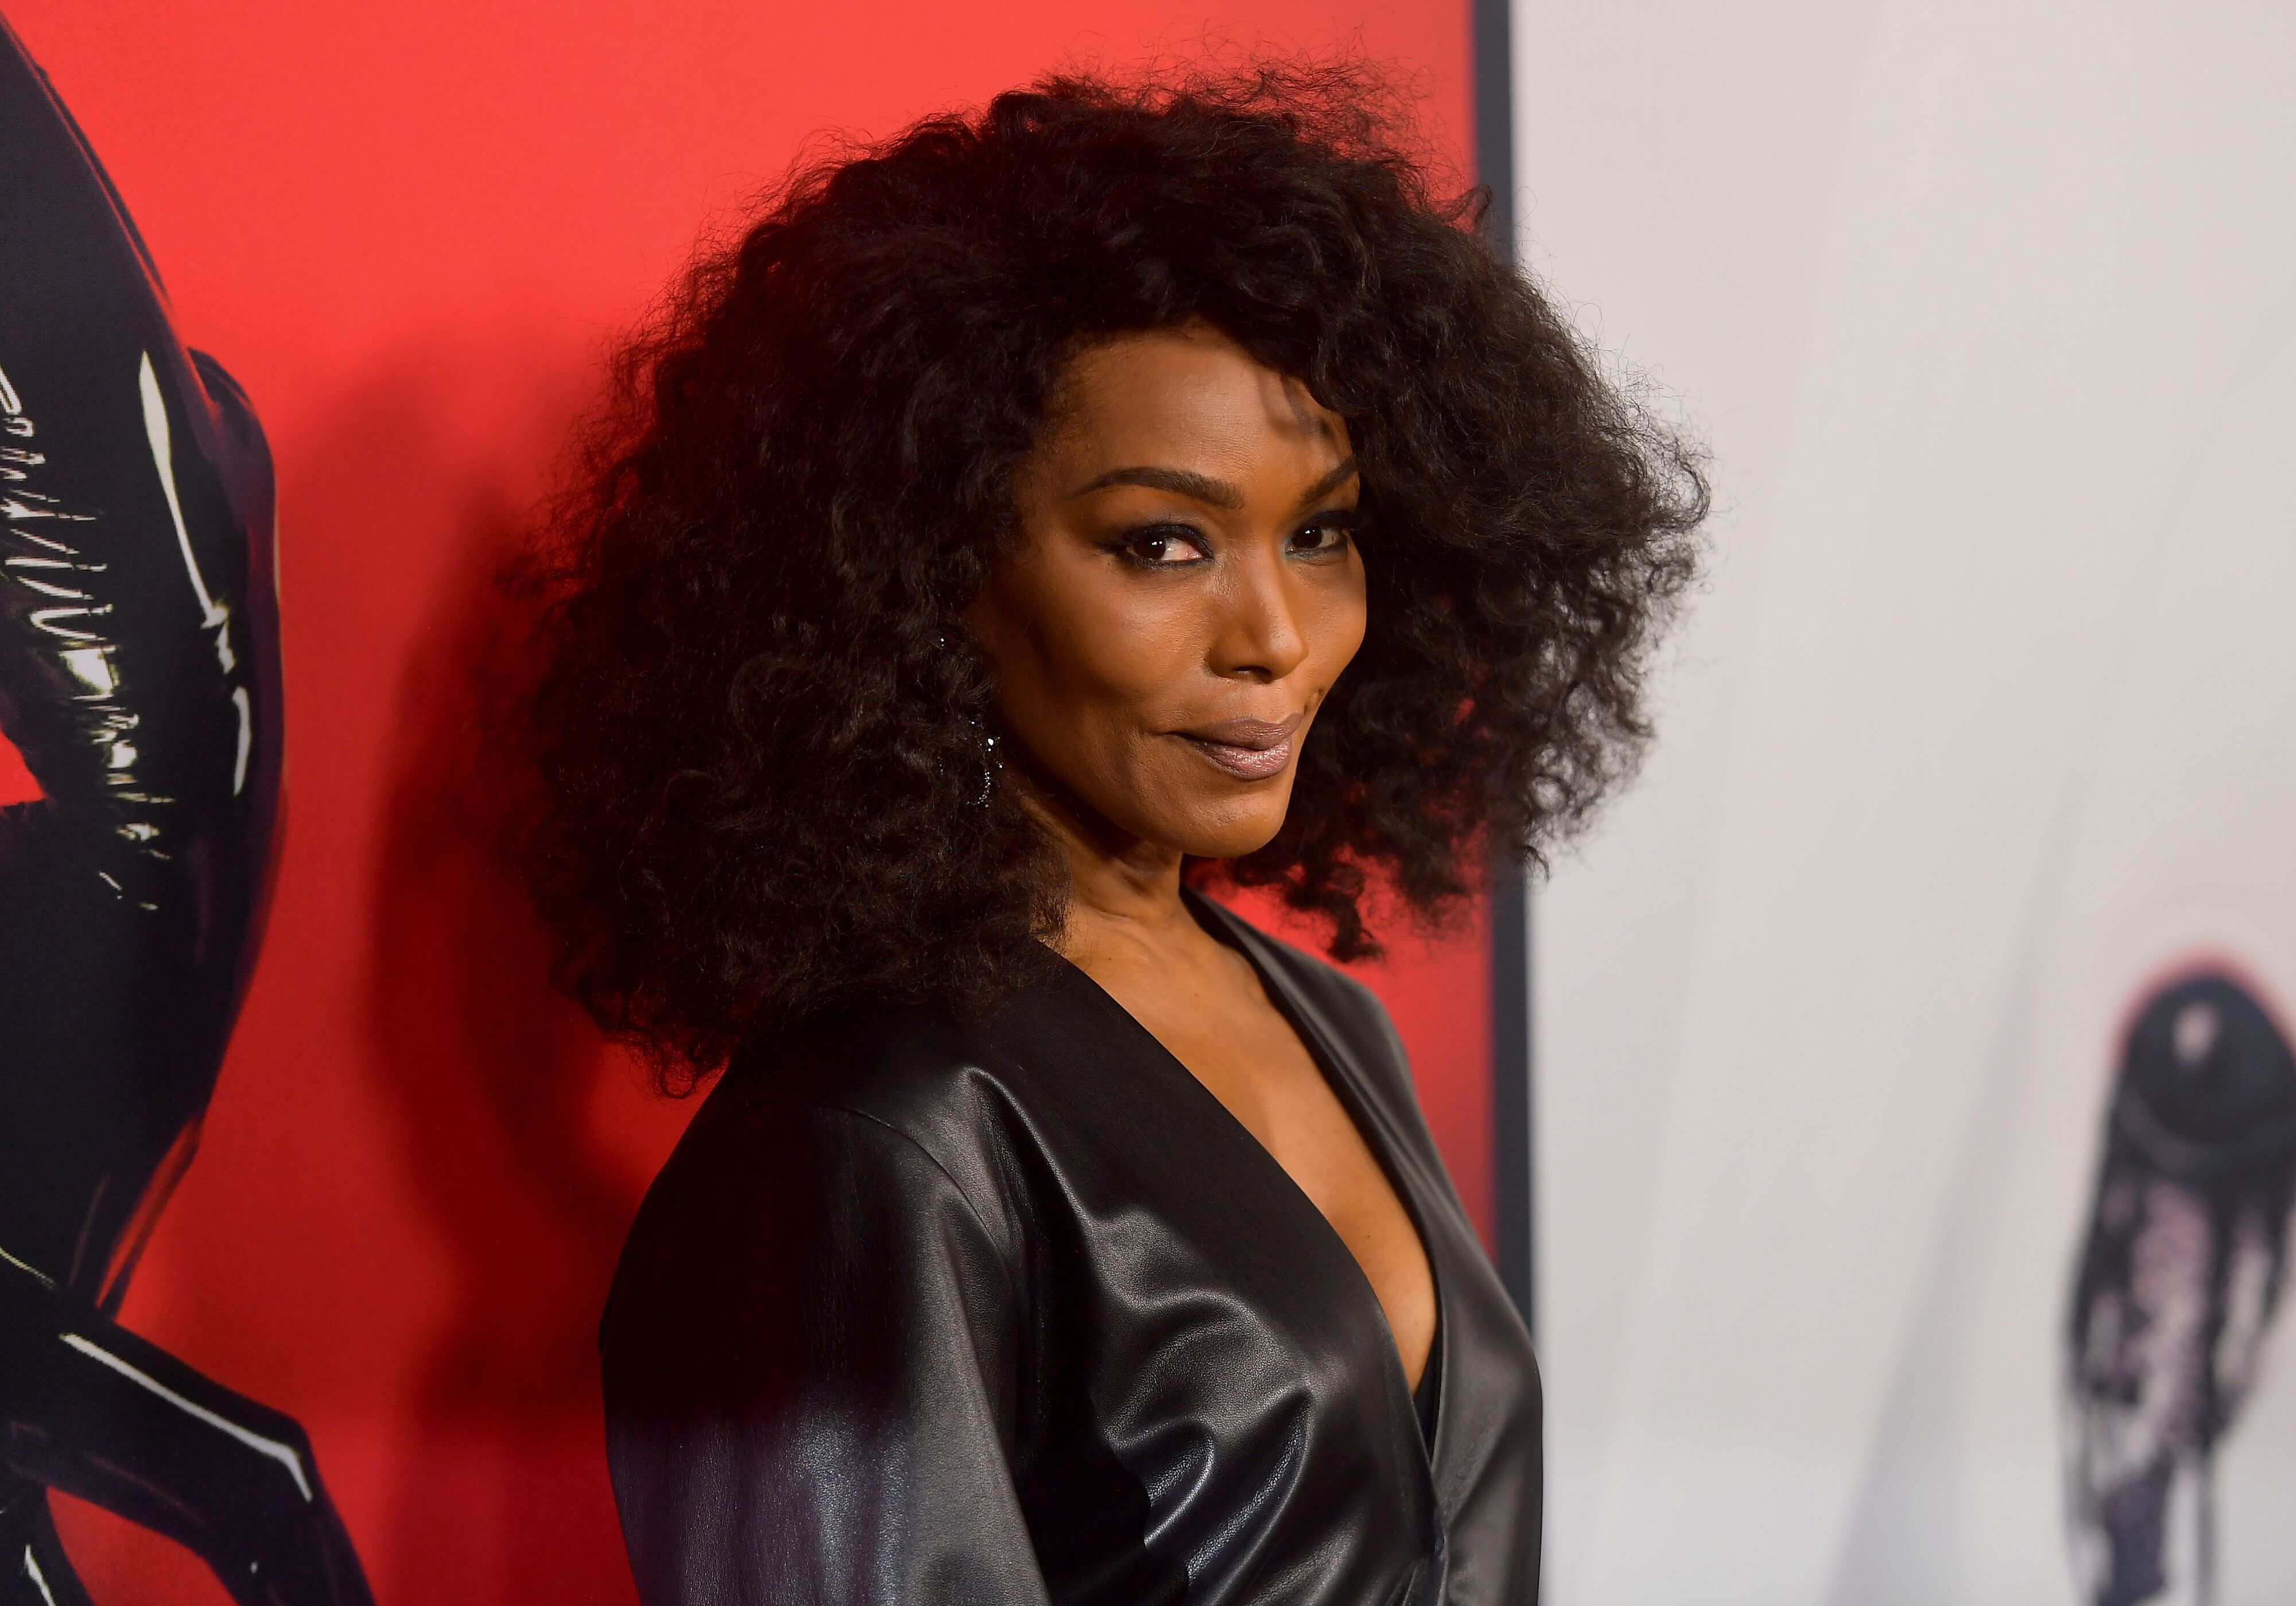 Angela Bassett attends FX's "American Horror Story" 100th Episode Celebration at Hollywood Forever on October 26, 2019. | Photo: Getty Images